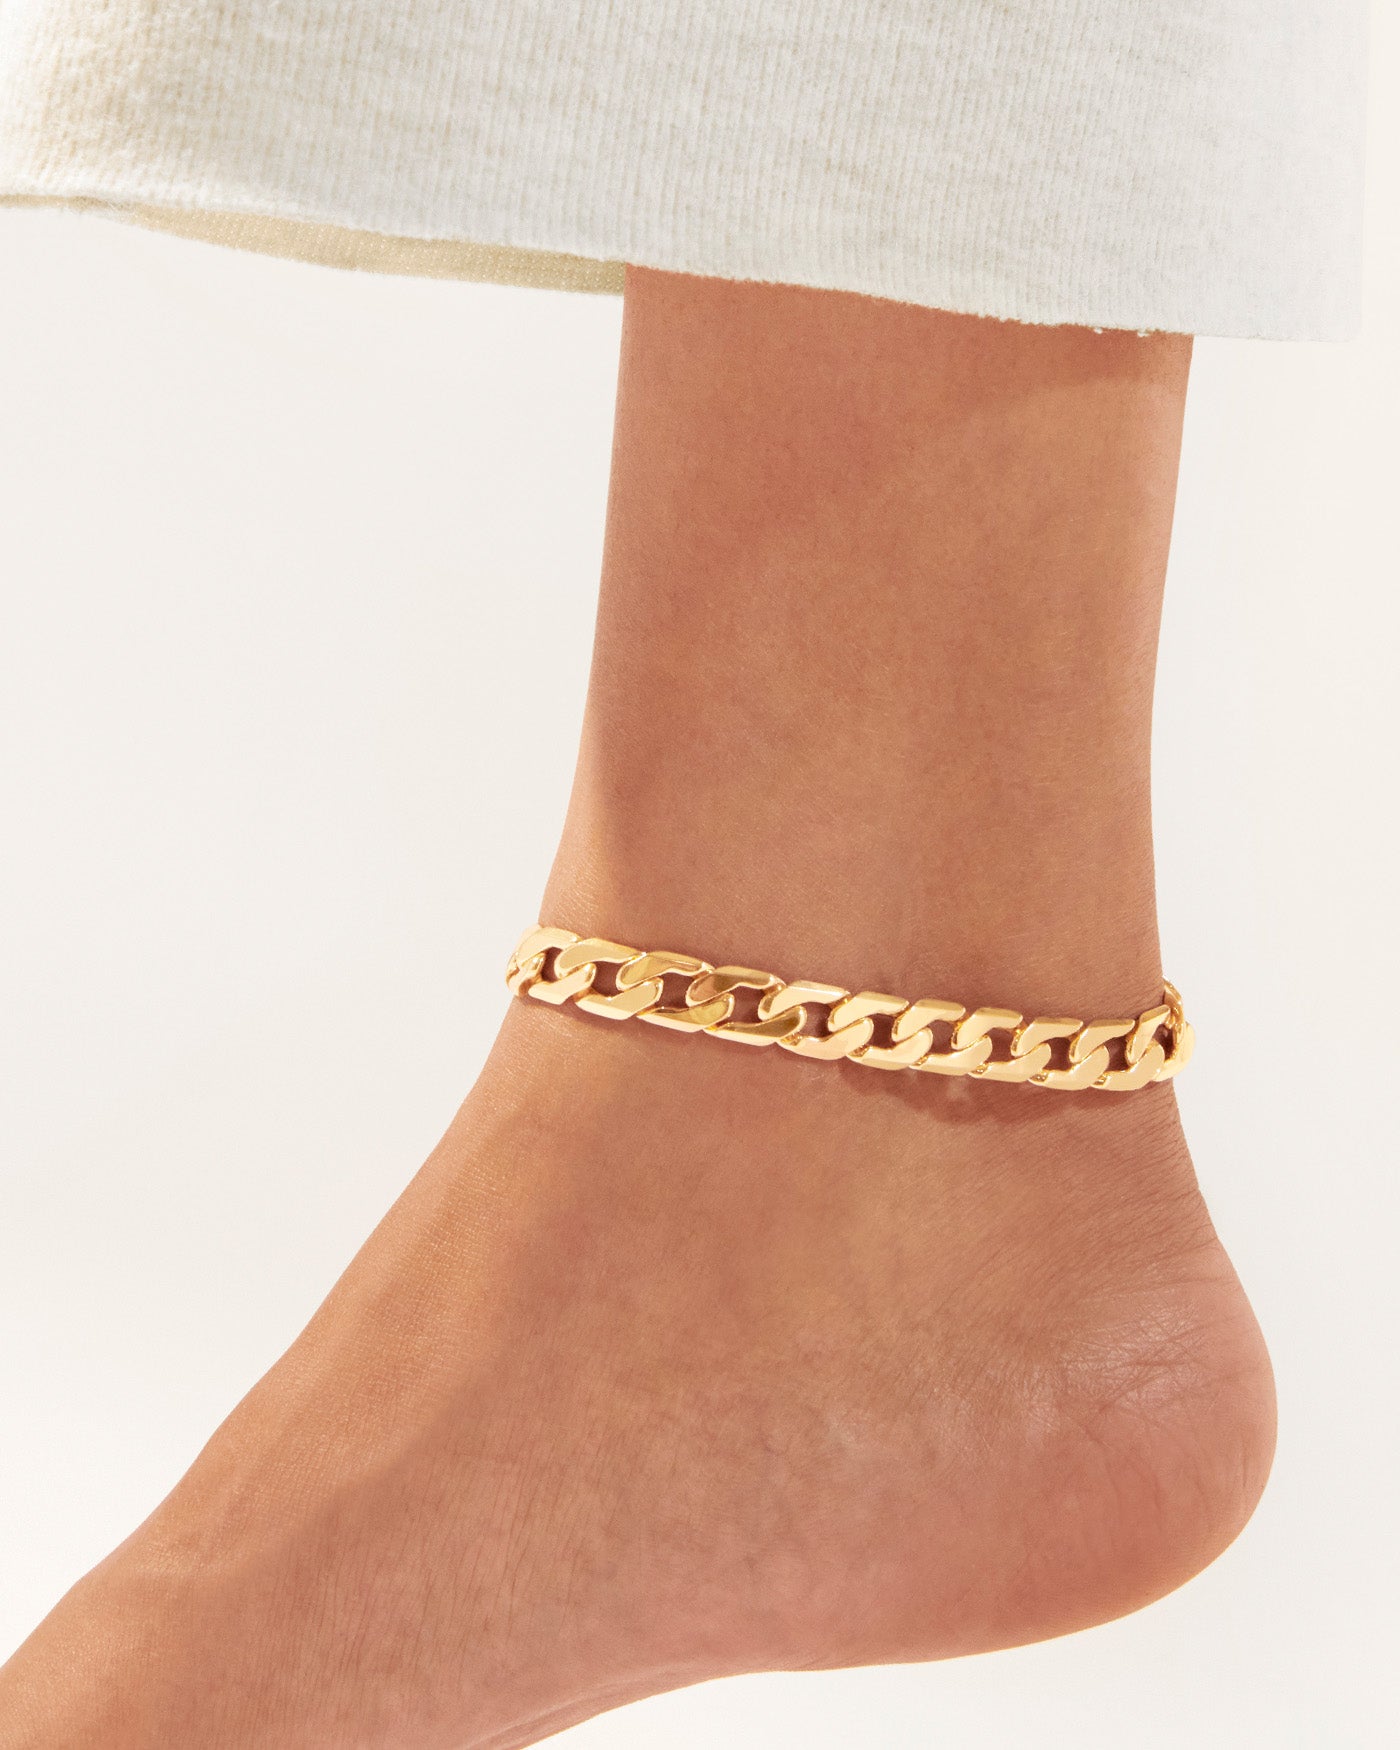 Top 20 Most Popular Ankle Chains Today | Women's Fashion Guide | Classy  Women Collection